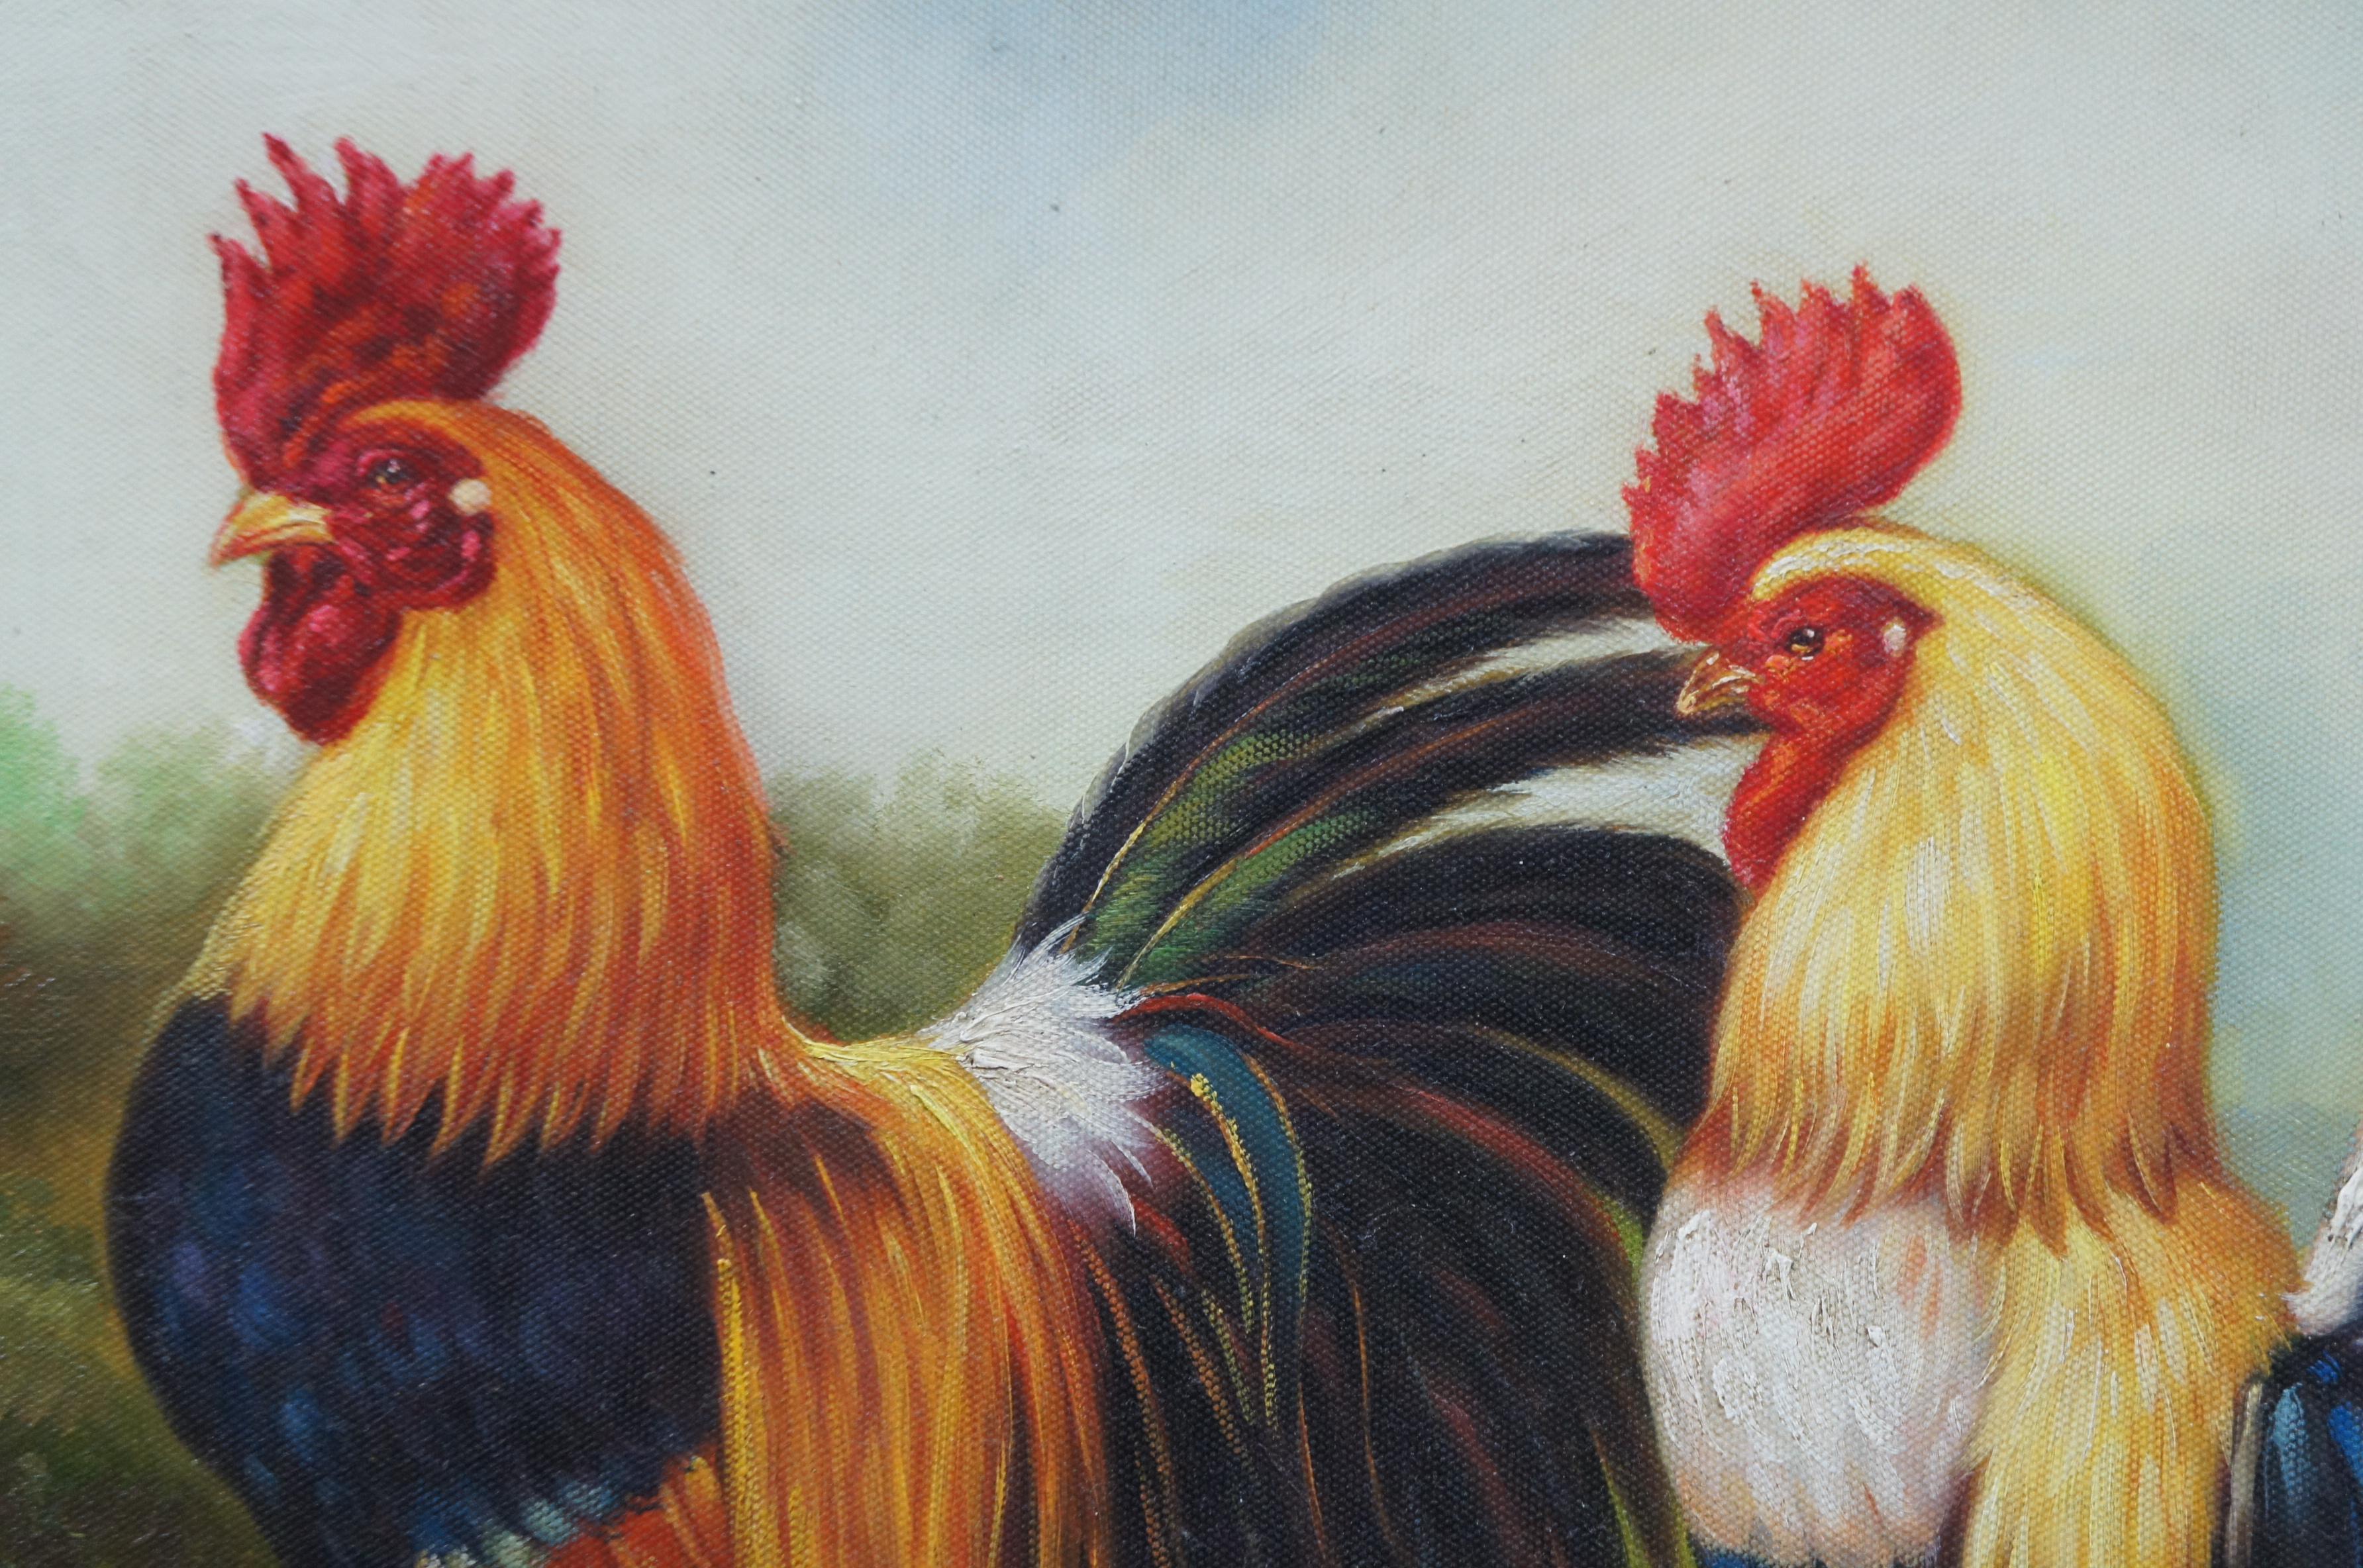 Rooster Oil Painting on Canvas by W. Ceruti Chickens Barnyard Farmhouse 6